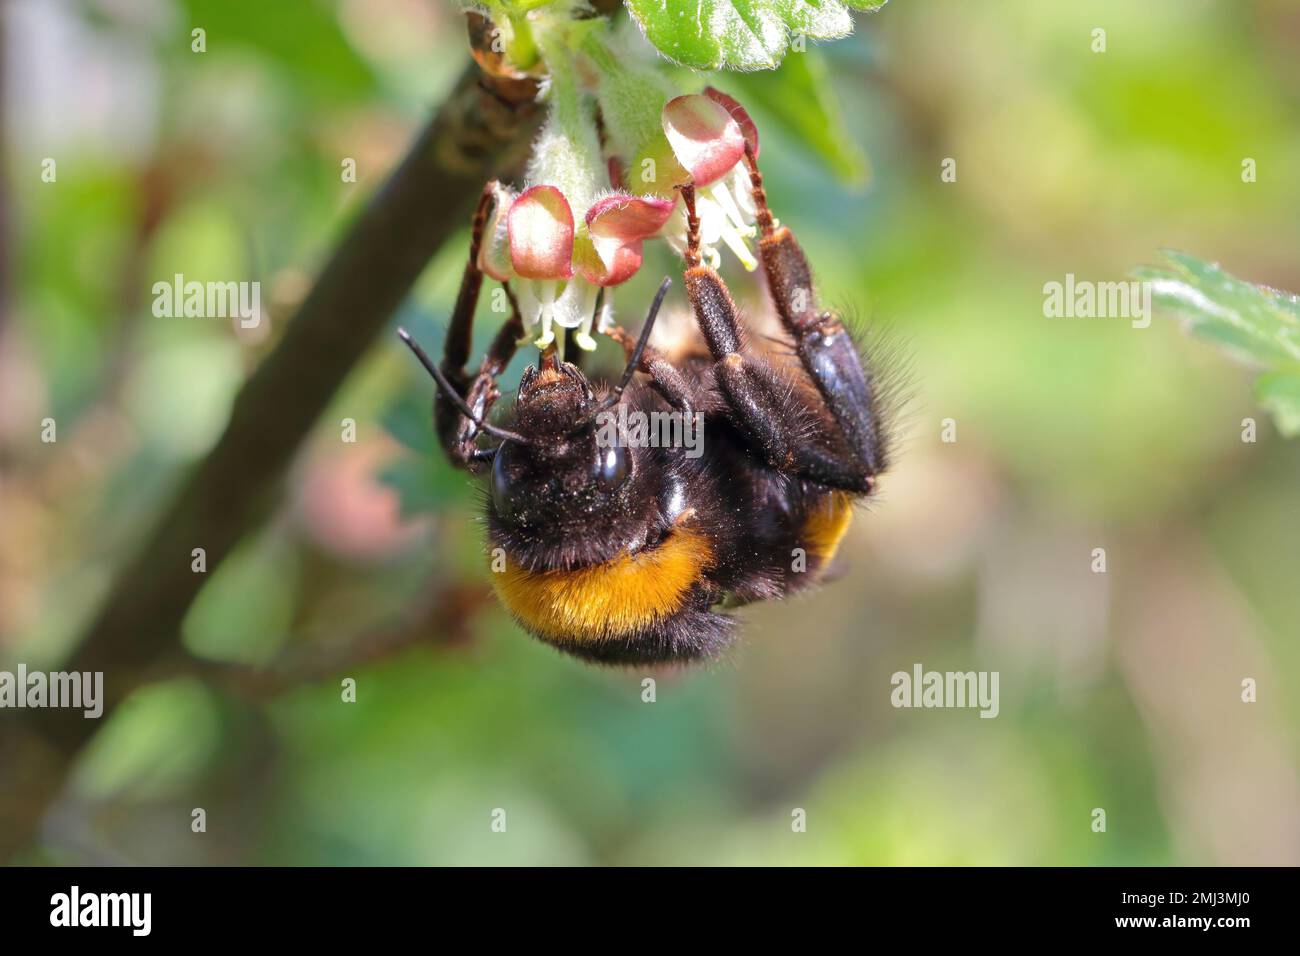 Bumblebee (Bombus sp.) pollinating flowers. Feeding, pollinating the gooseberry blossom in the garden in spring. Stock Photo